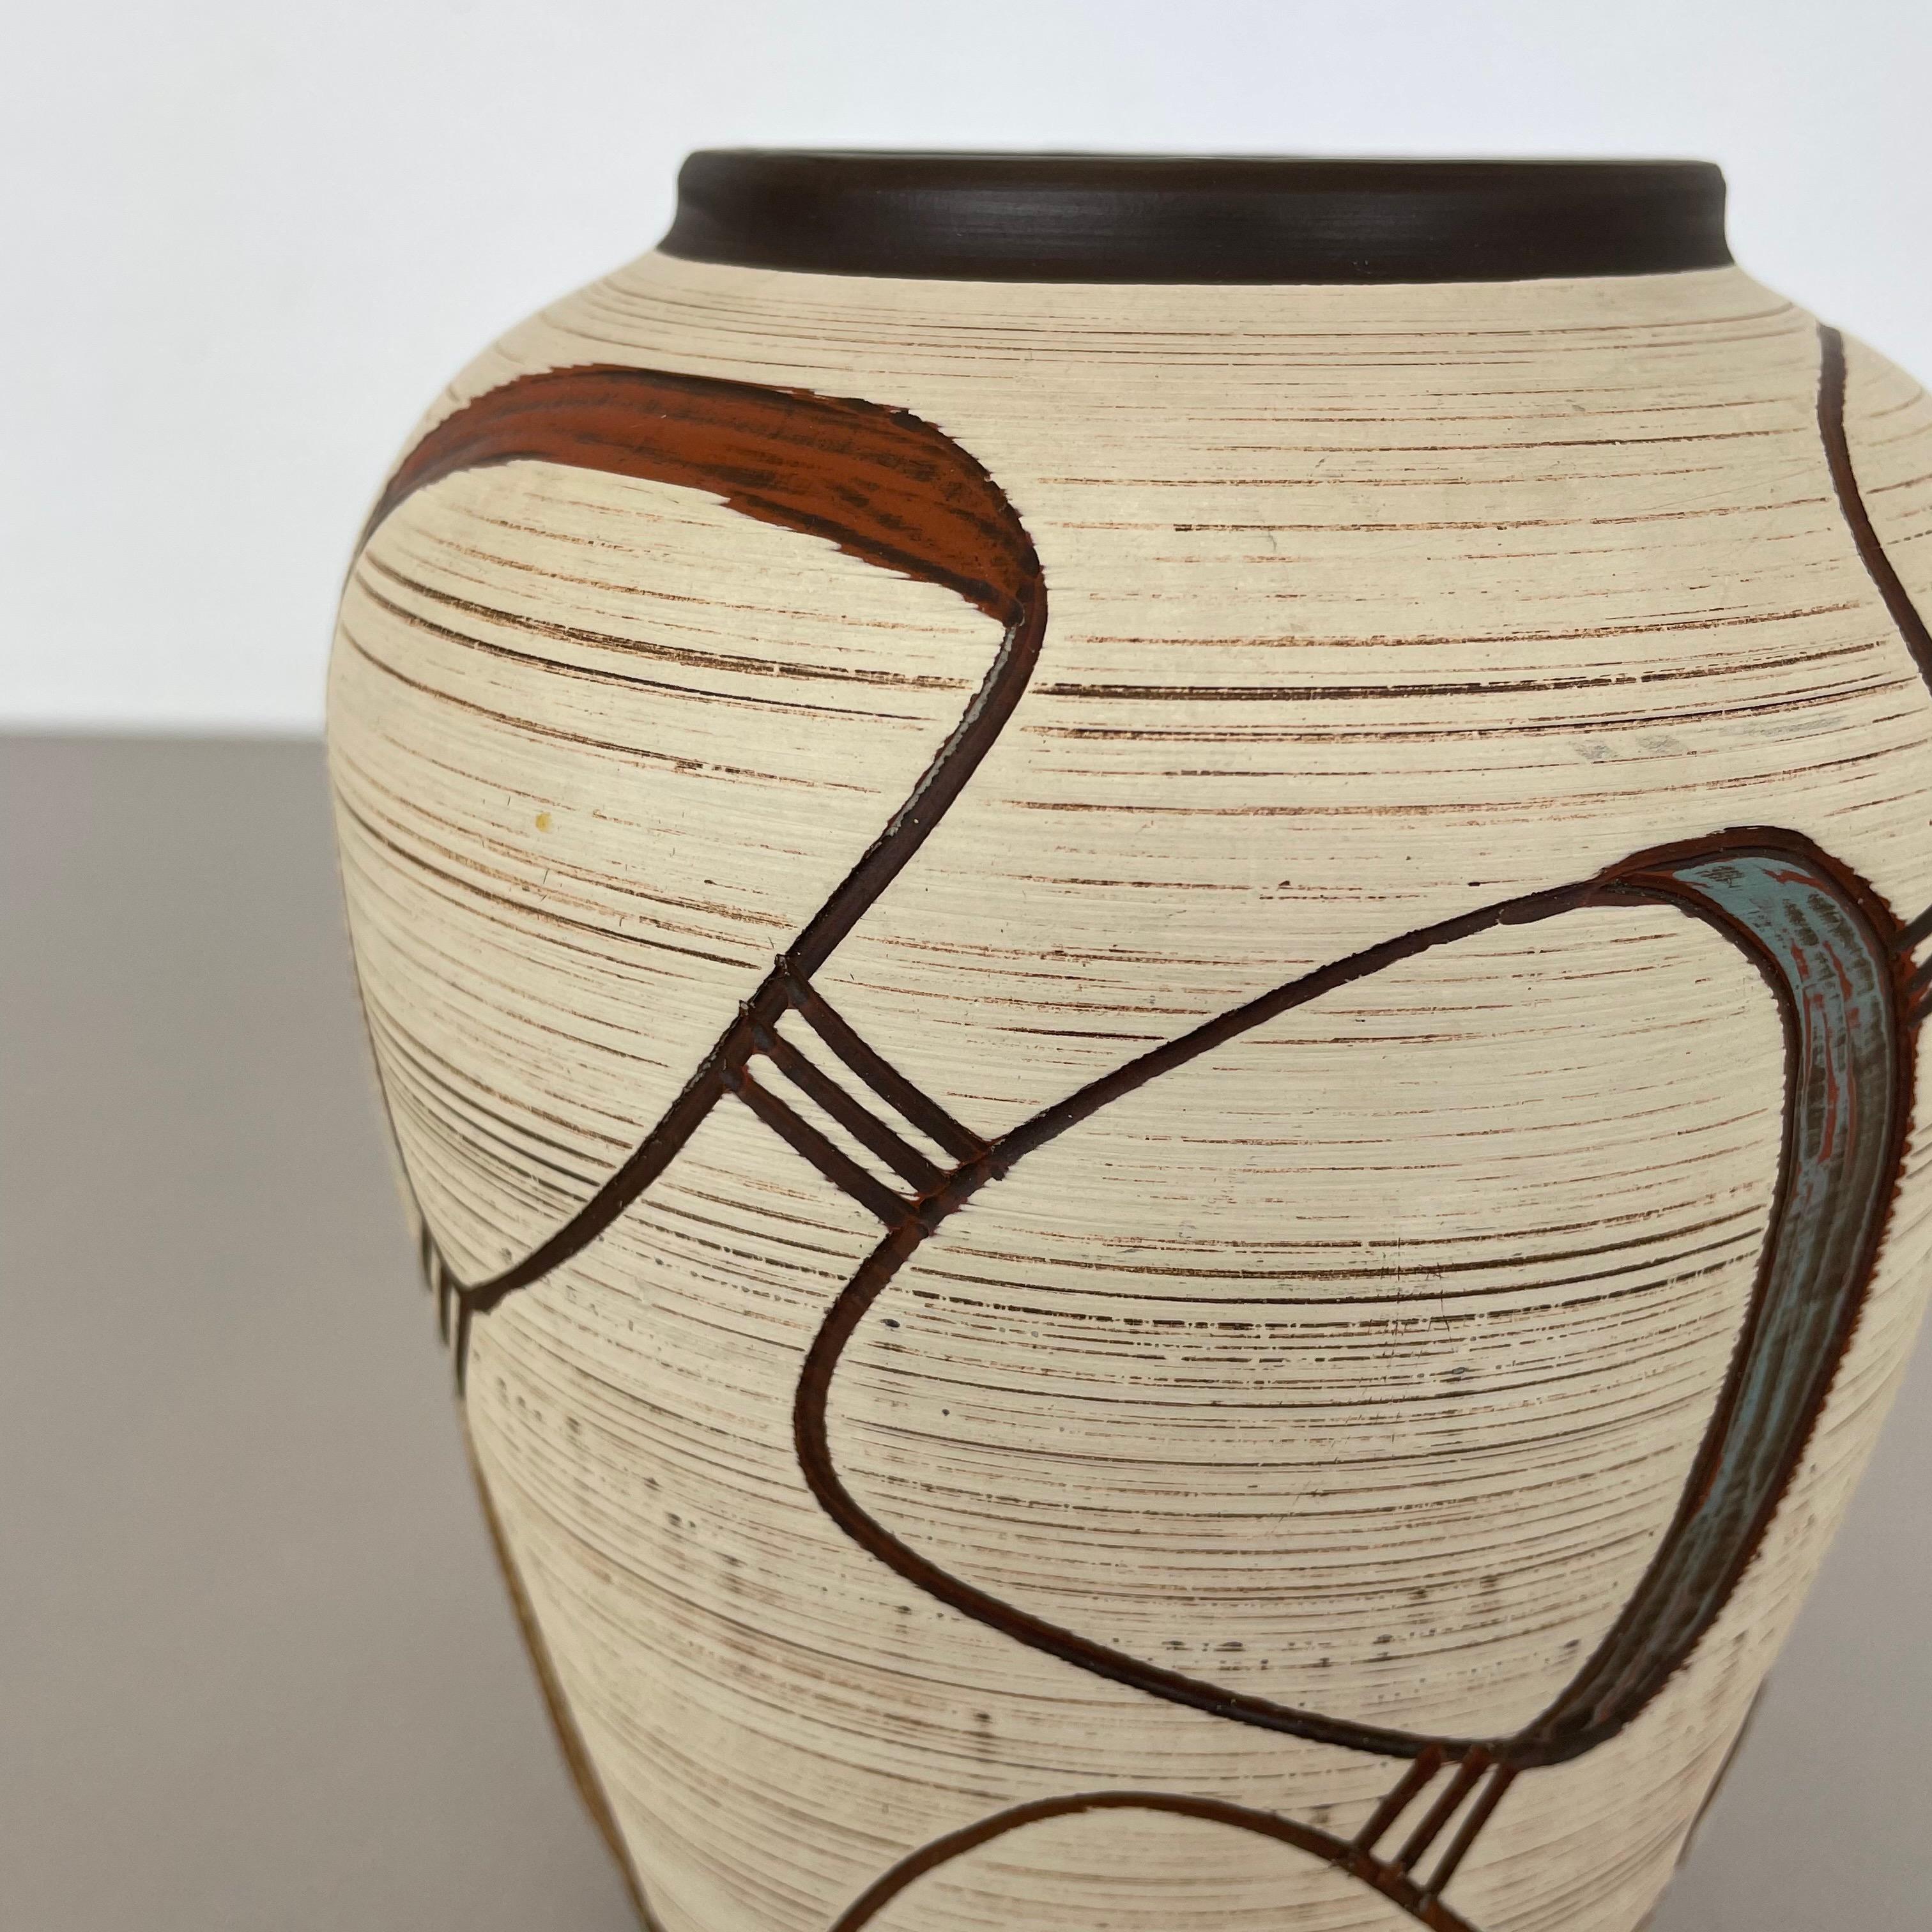 abstract pottery designs